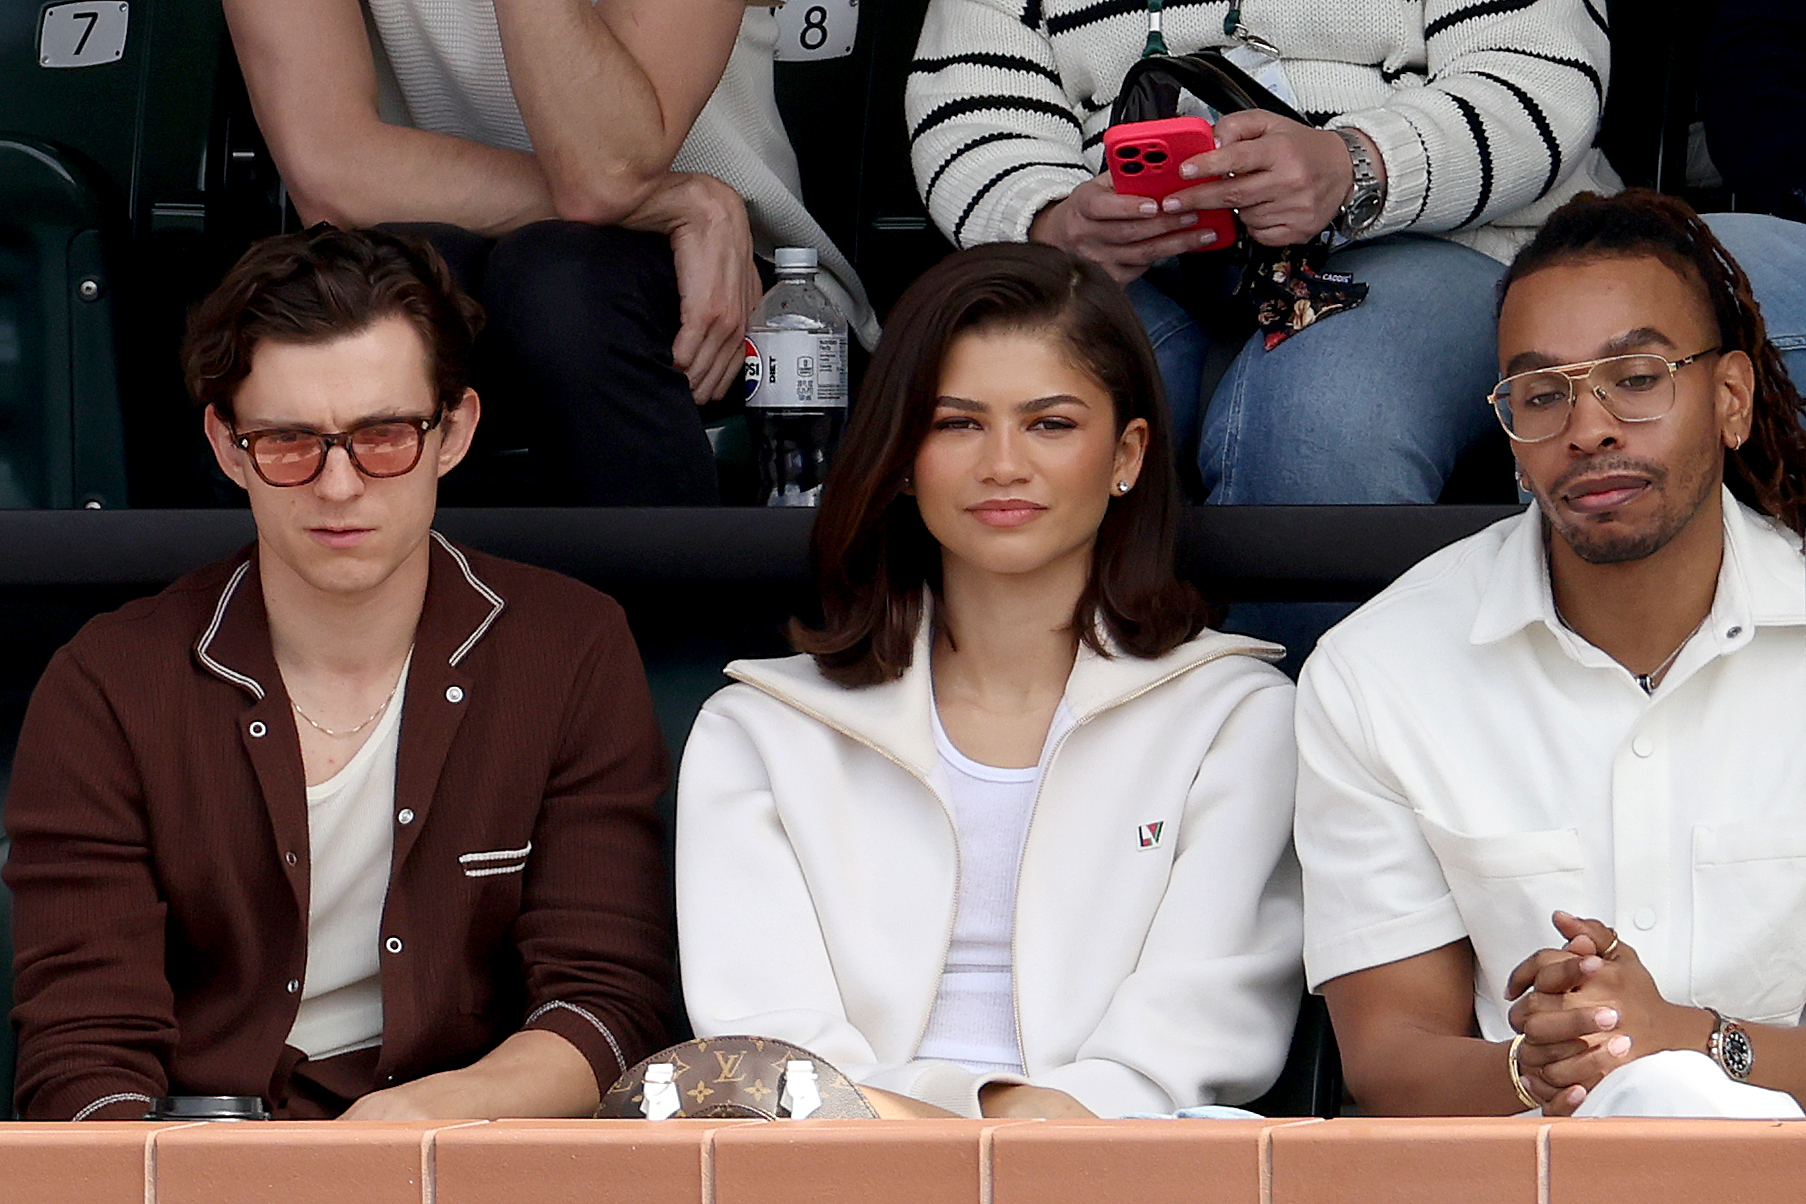 Tom Holland, Zendaya, and another person seated, casually dressed at a sports event